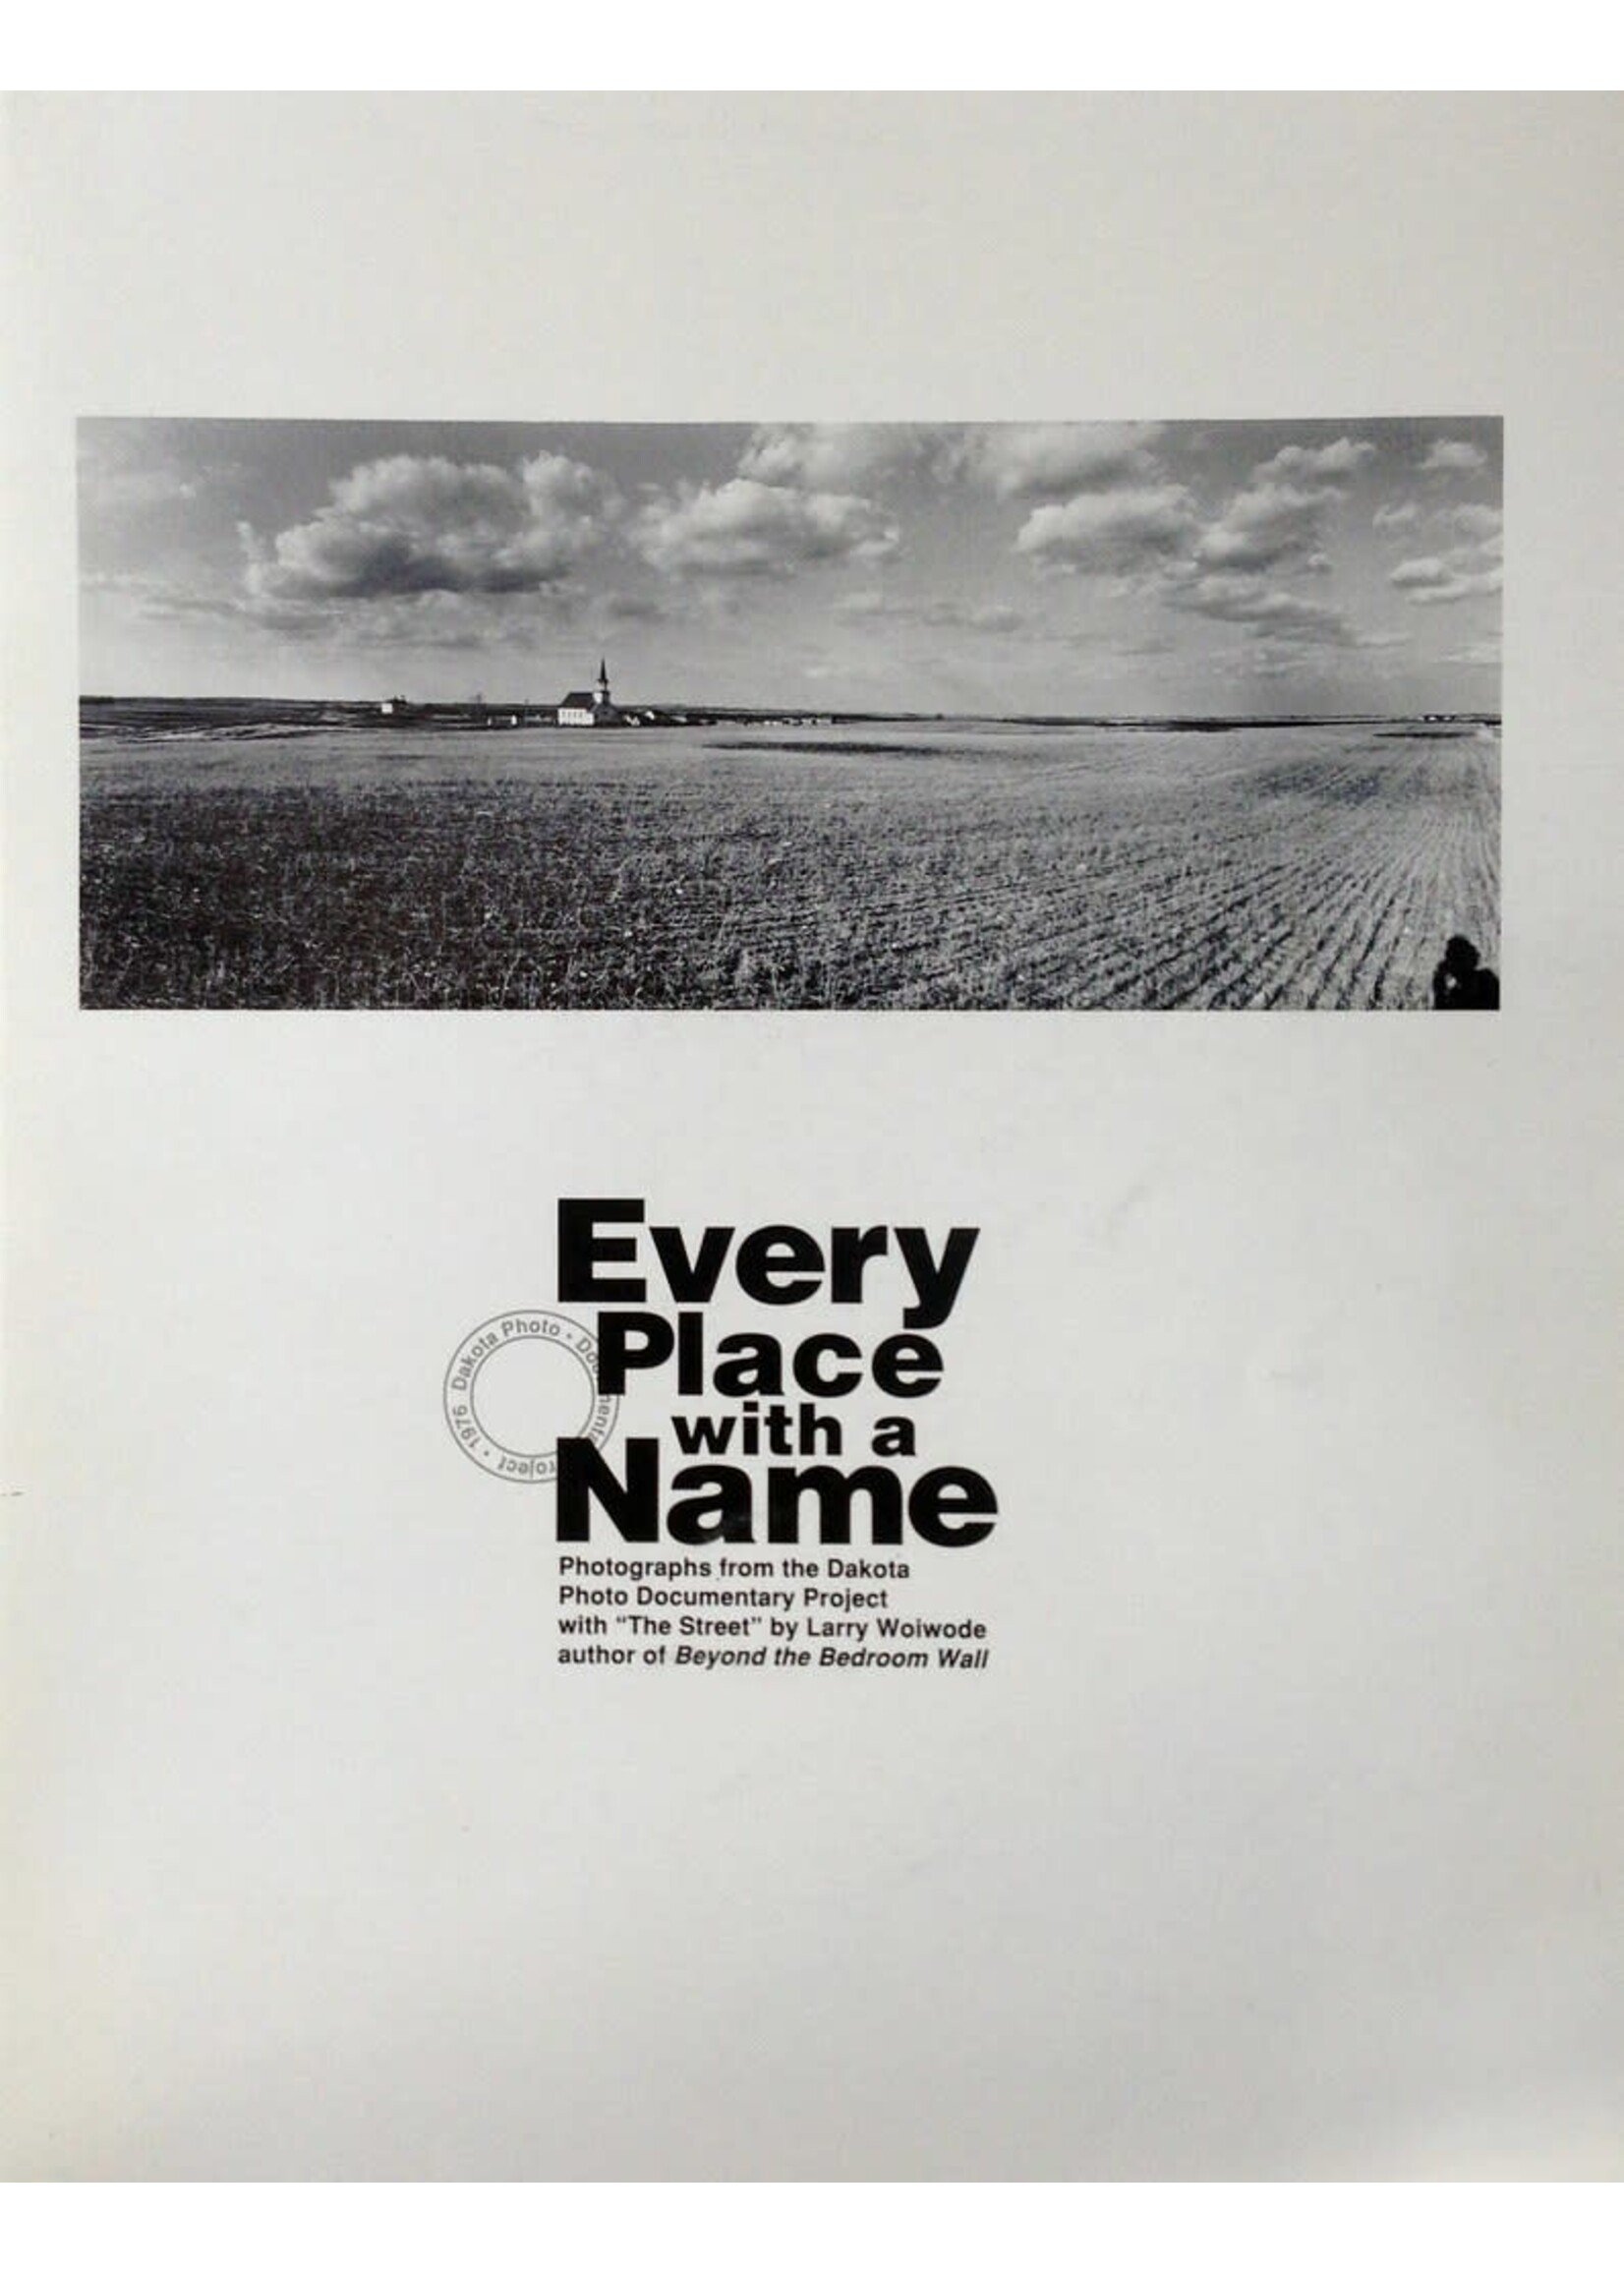 Every Place with a name